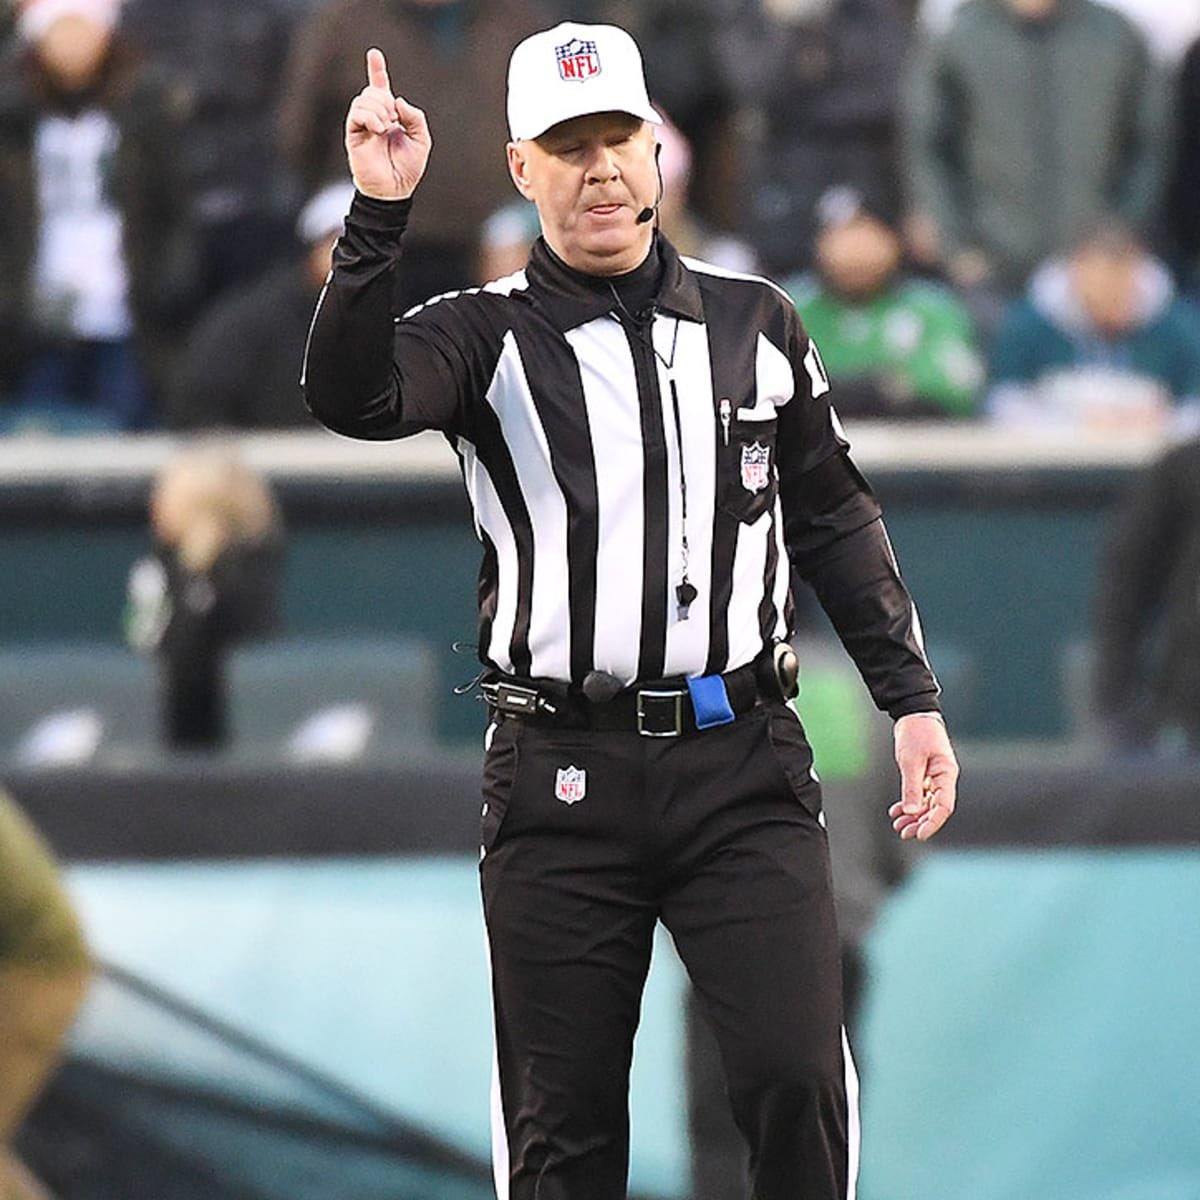 ESPN analyst John Parry is joining the Bills as officiating liaison per @nypost